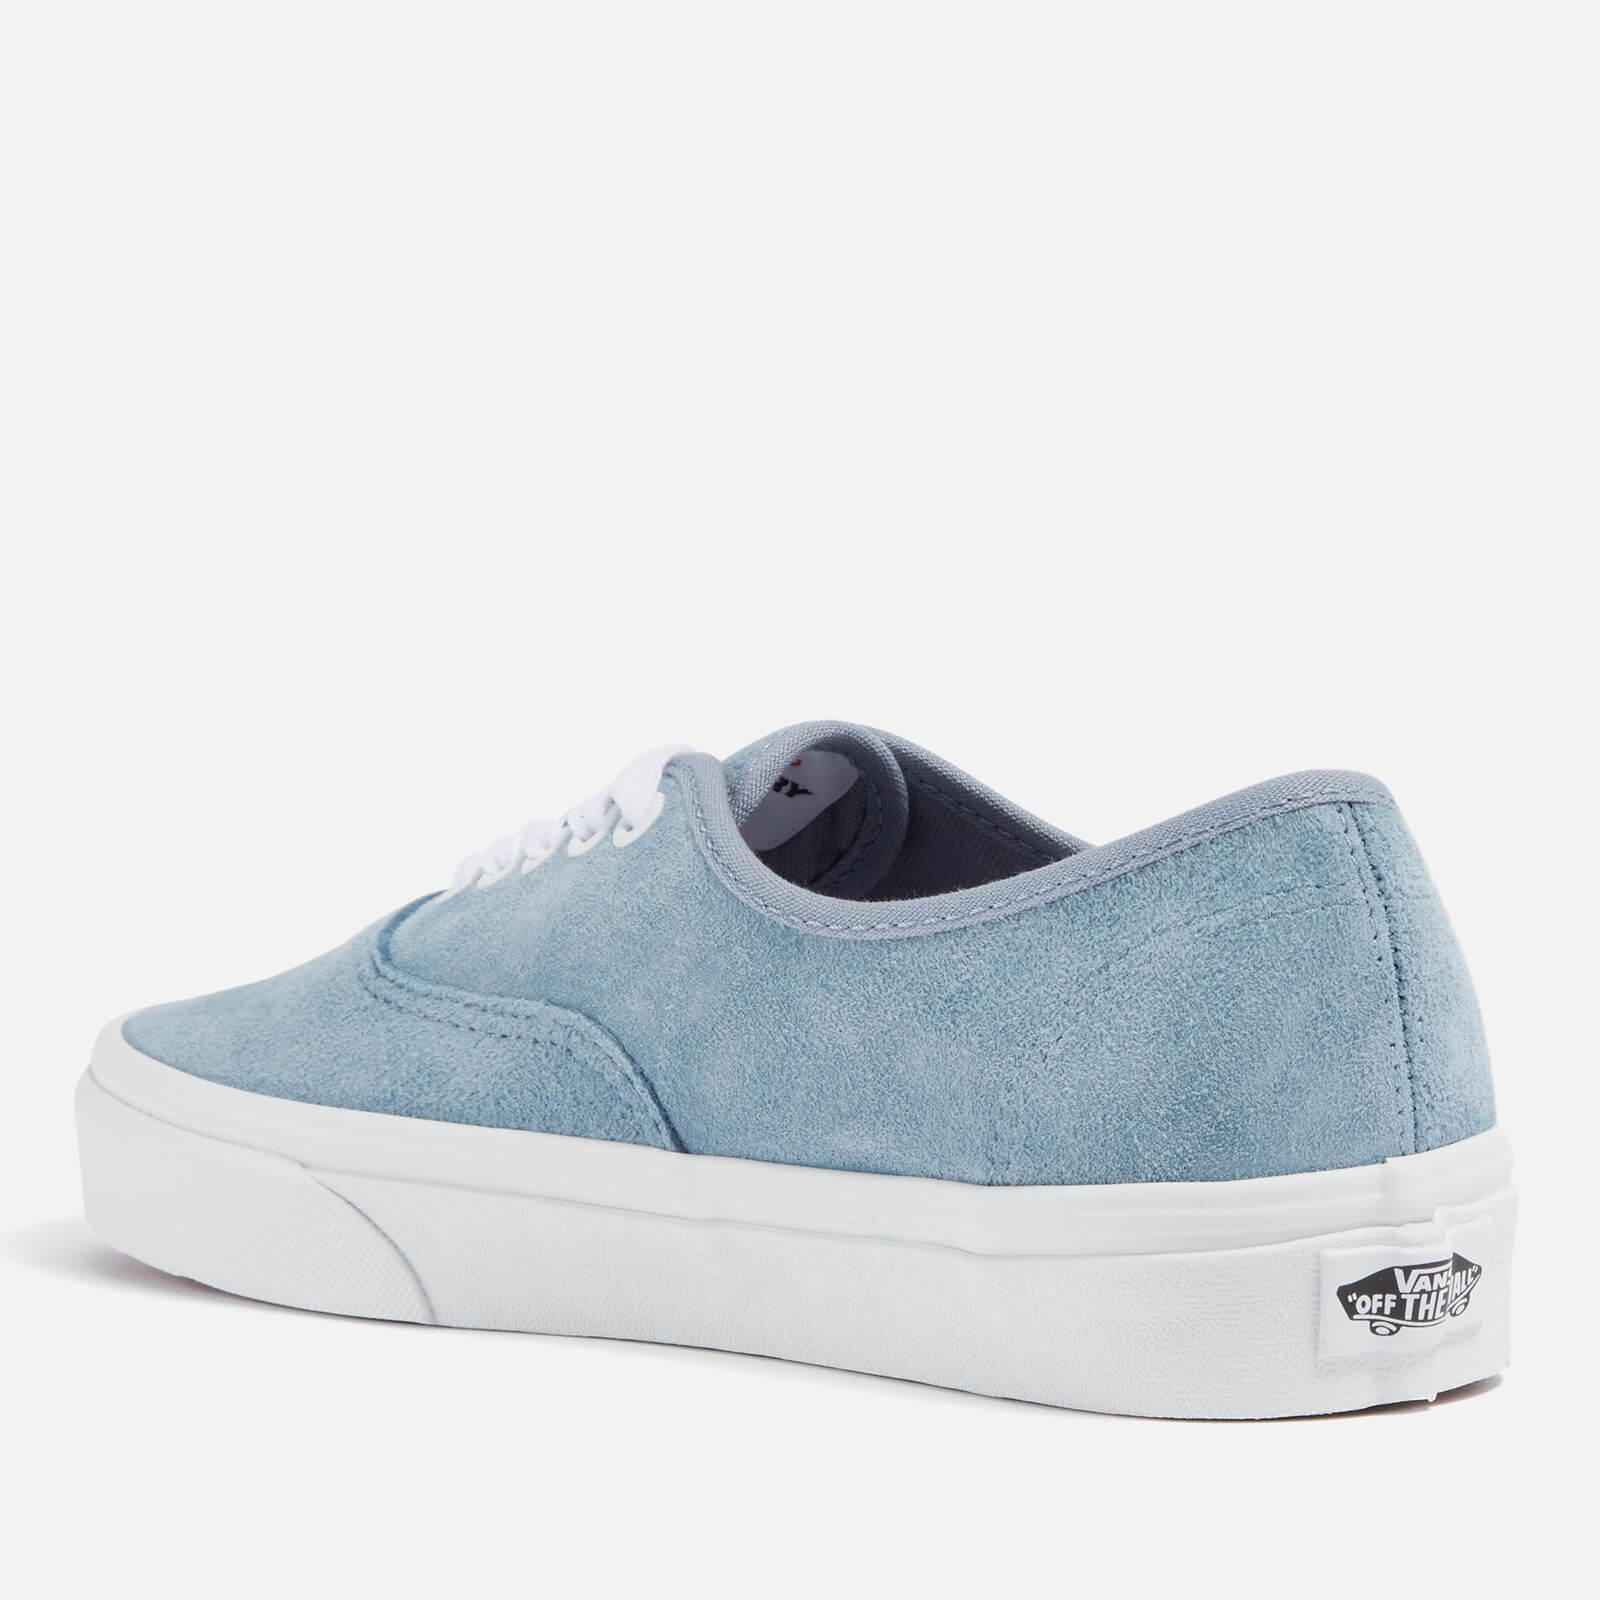 Vans Authentic Suede Trainers in Blue | Lyst